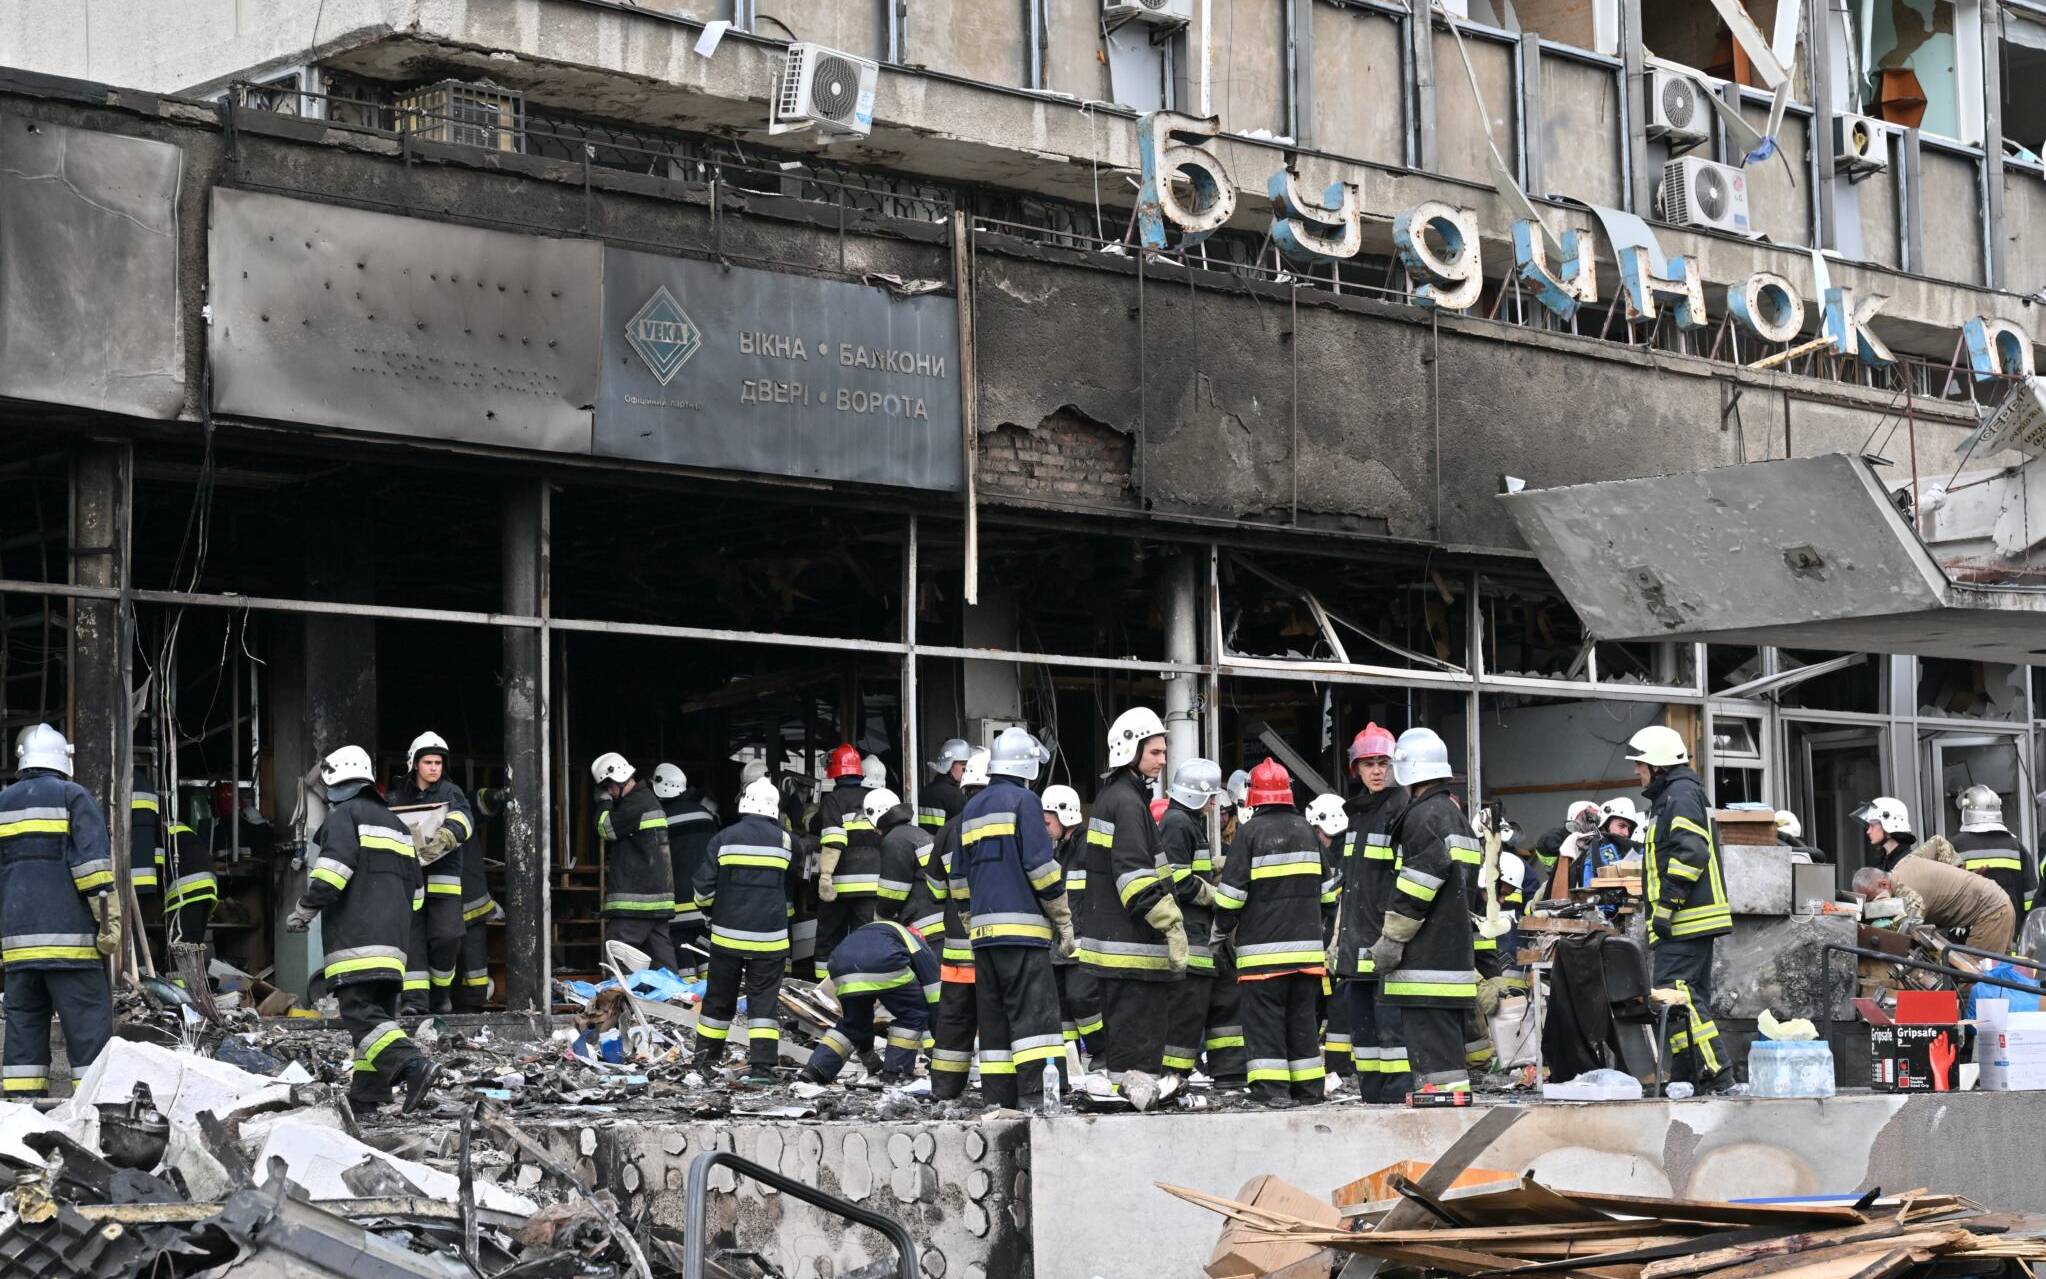 Firefighters remove rubbles out of a damaged building following a Russian airstrike in the city of Vinnytsia, west-central Ukraine on July 14, 2022. - At least 20 people were killed Thursday by Russian strikes on a city in central Ukraine, bombings described as "an openly terrorist act" by Ukrainian President Volodymyr Zelensky. (Photo by Sergei SUPINSKY / AFP)